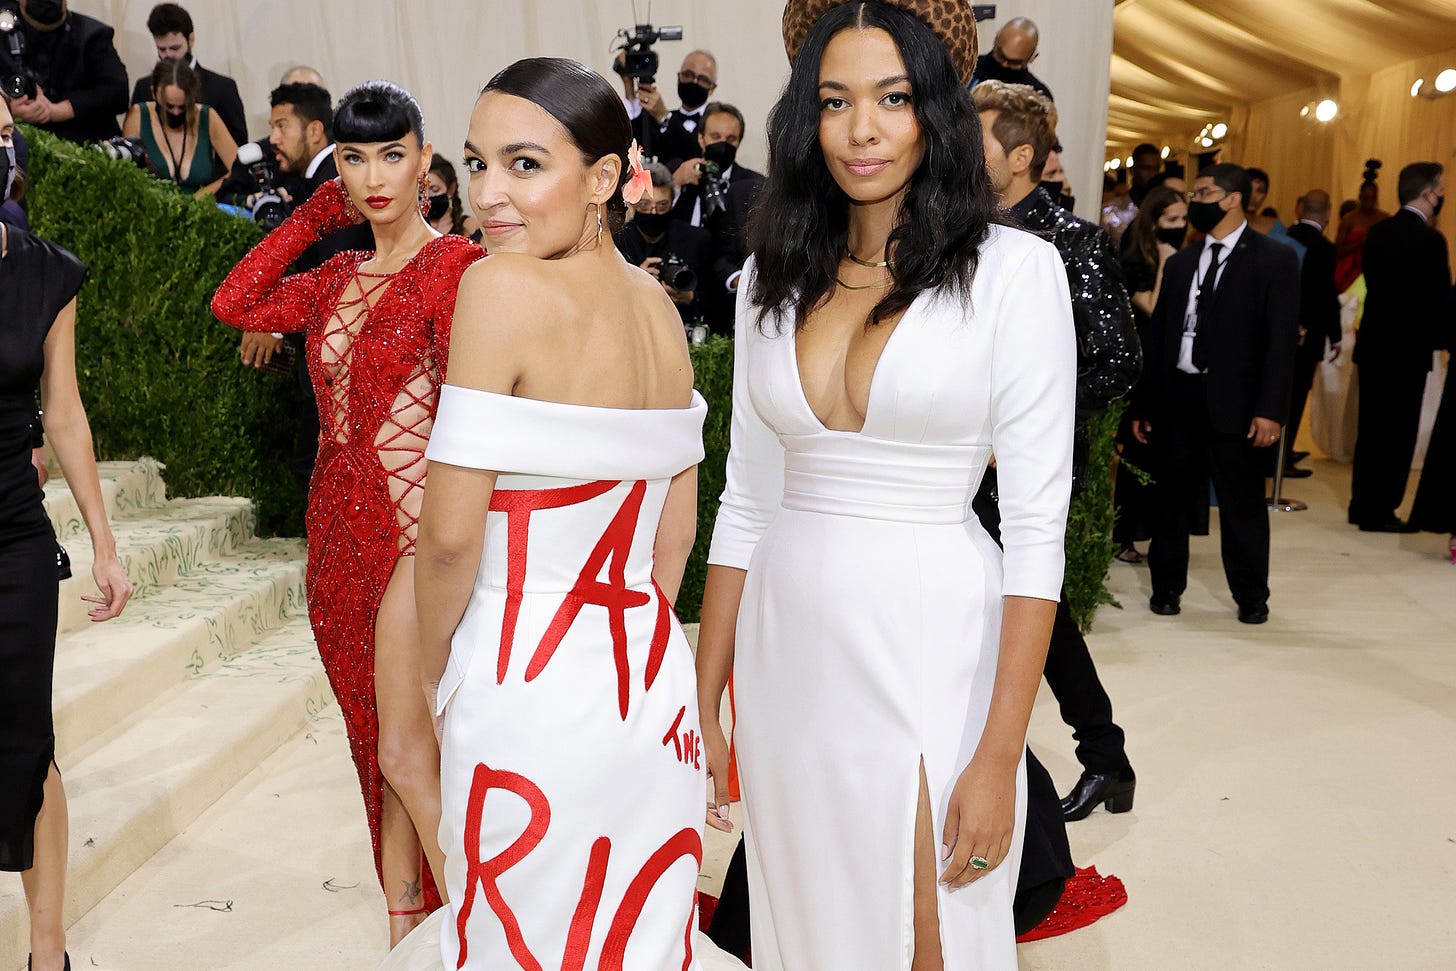 Conservative group files ethics complaint against AOC for attending Met Gala